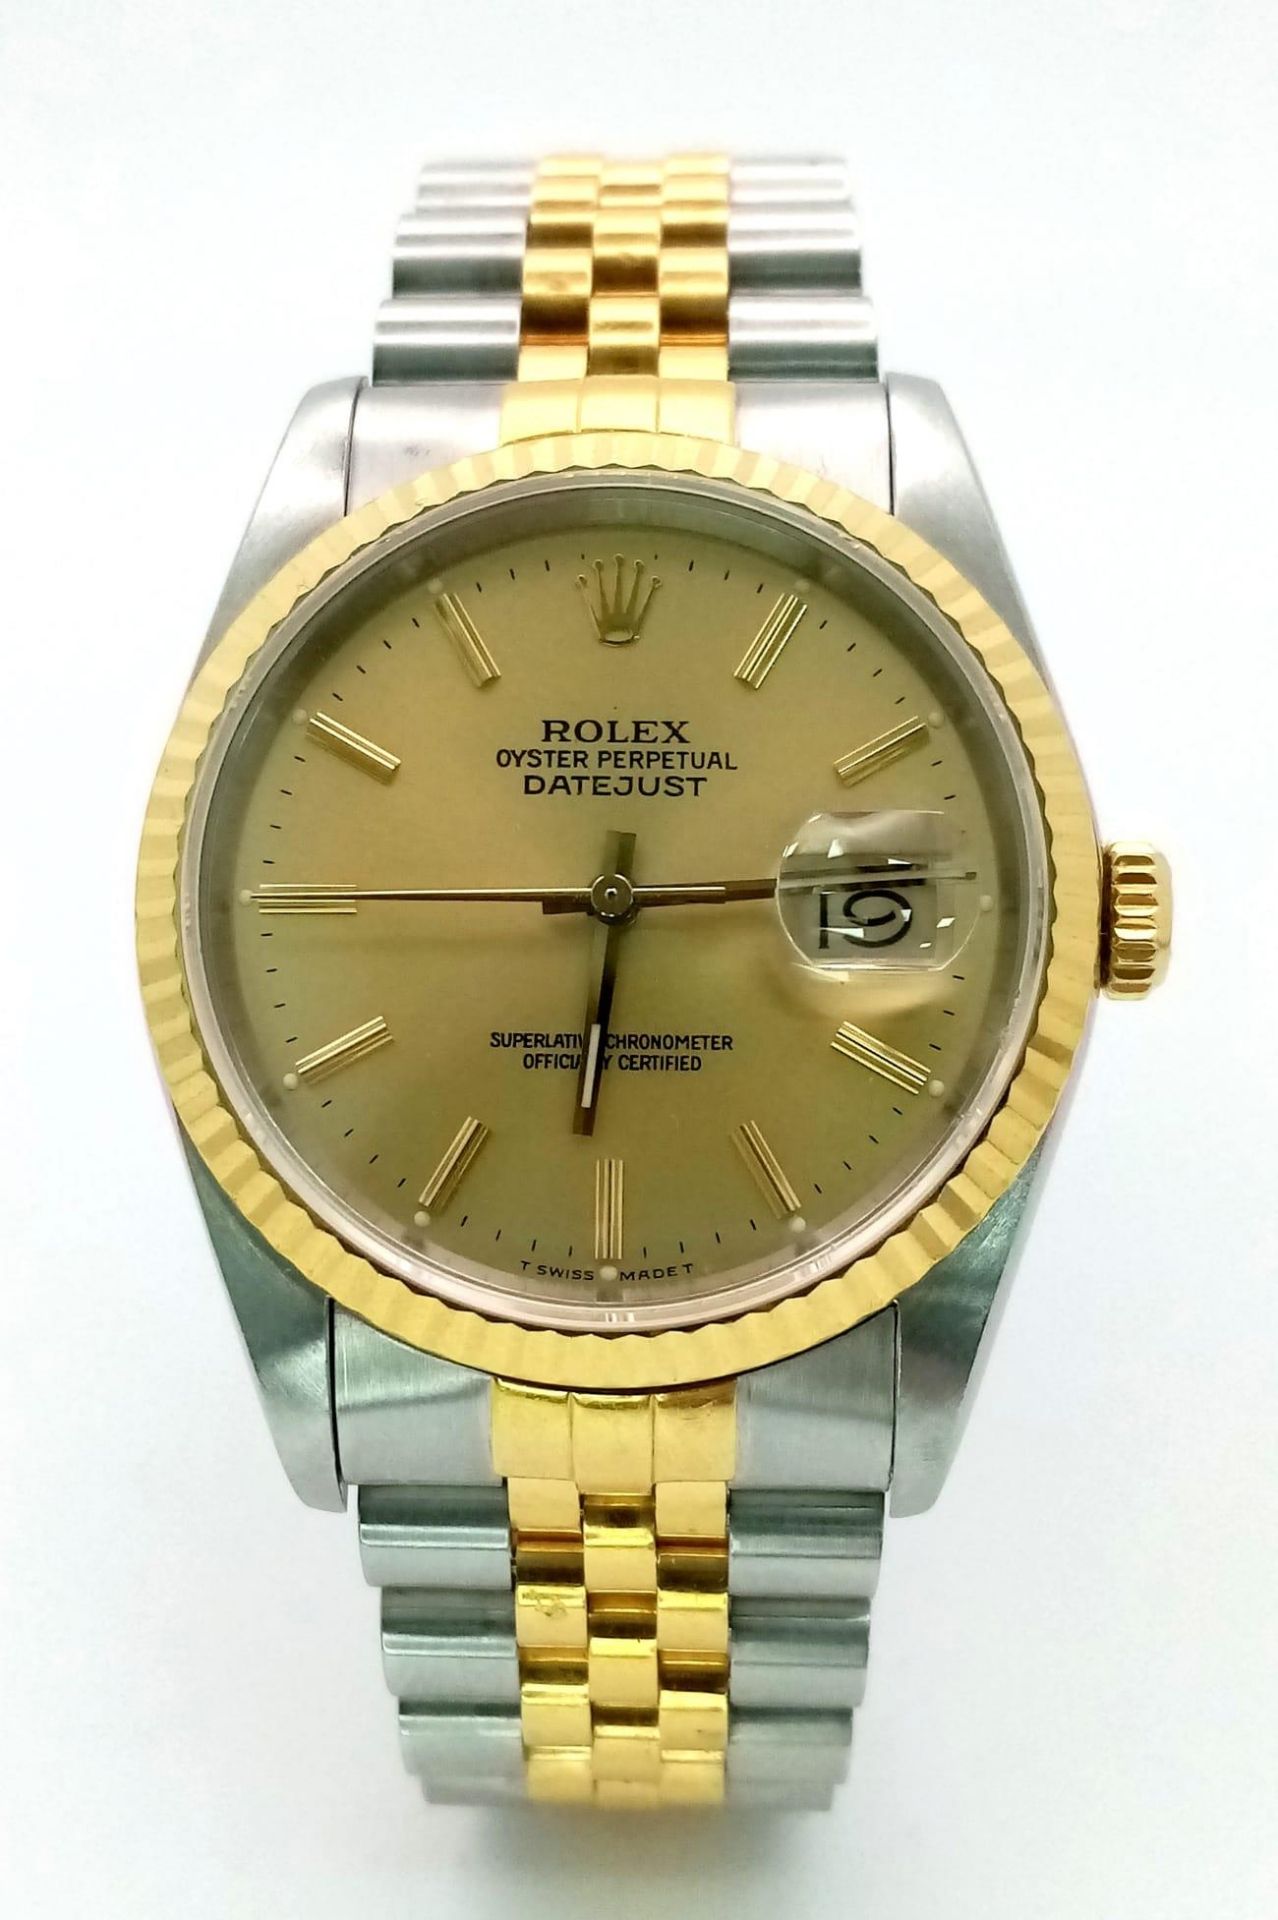 THE CLASSIC ROLEX OYSTER PERPETUAL DATEJUST IN BI-METAL WITH GOLDTONE DIAL . 36mm